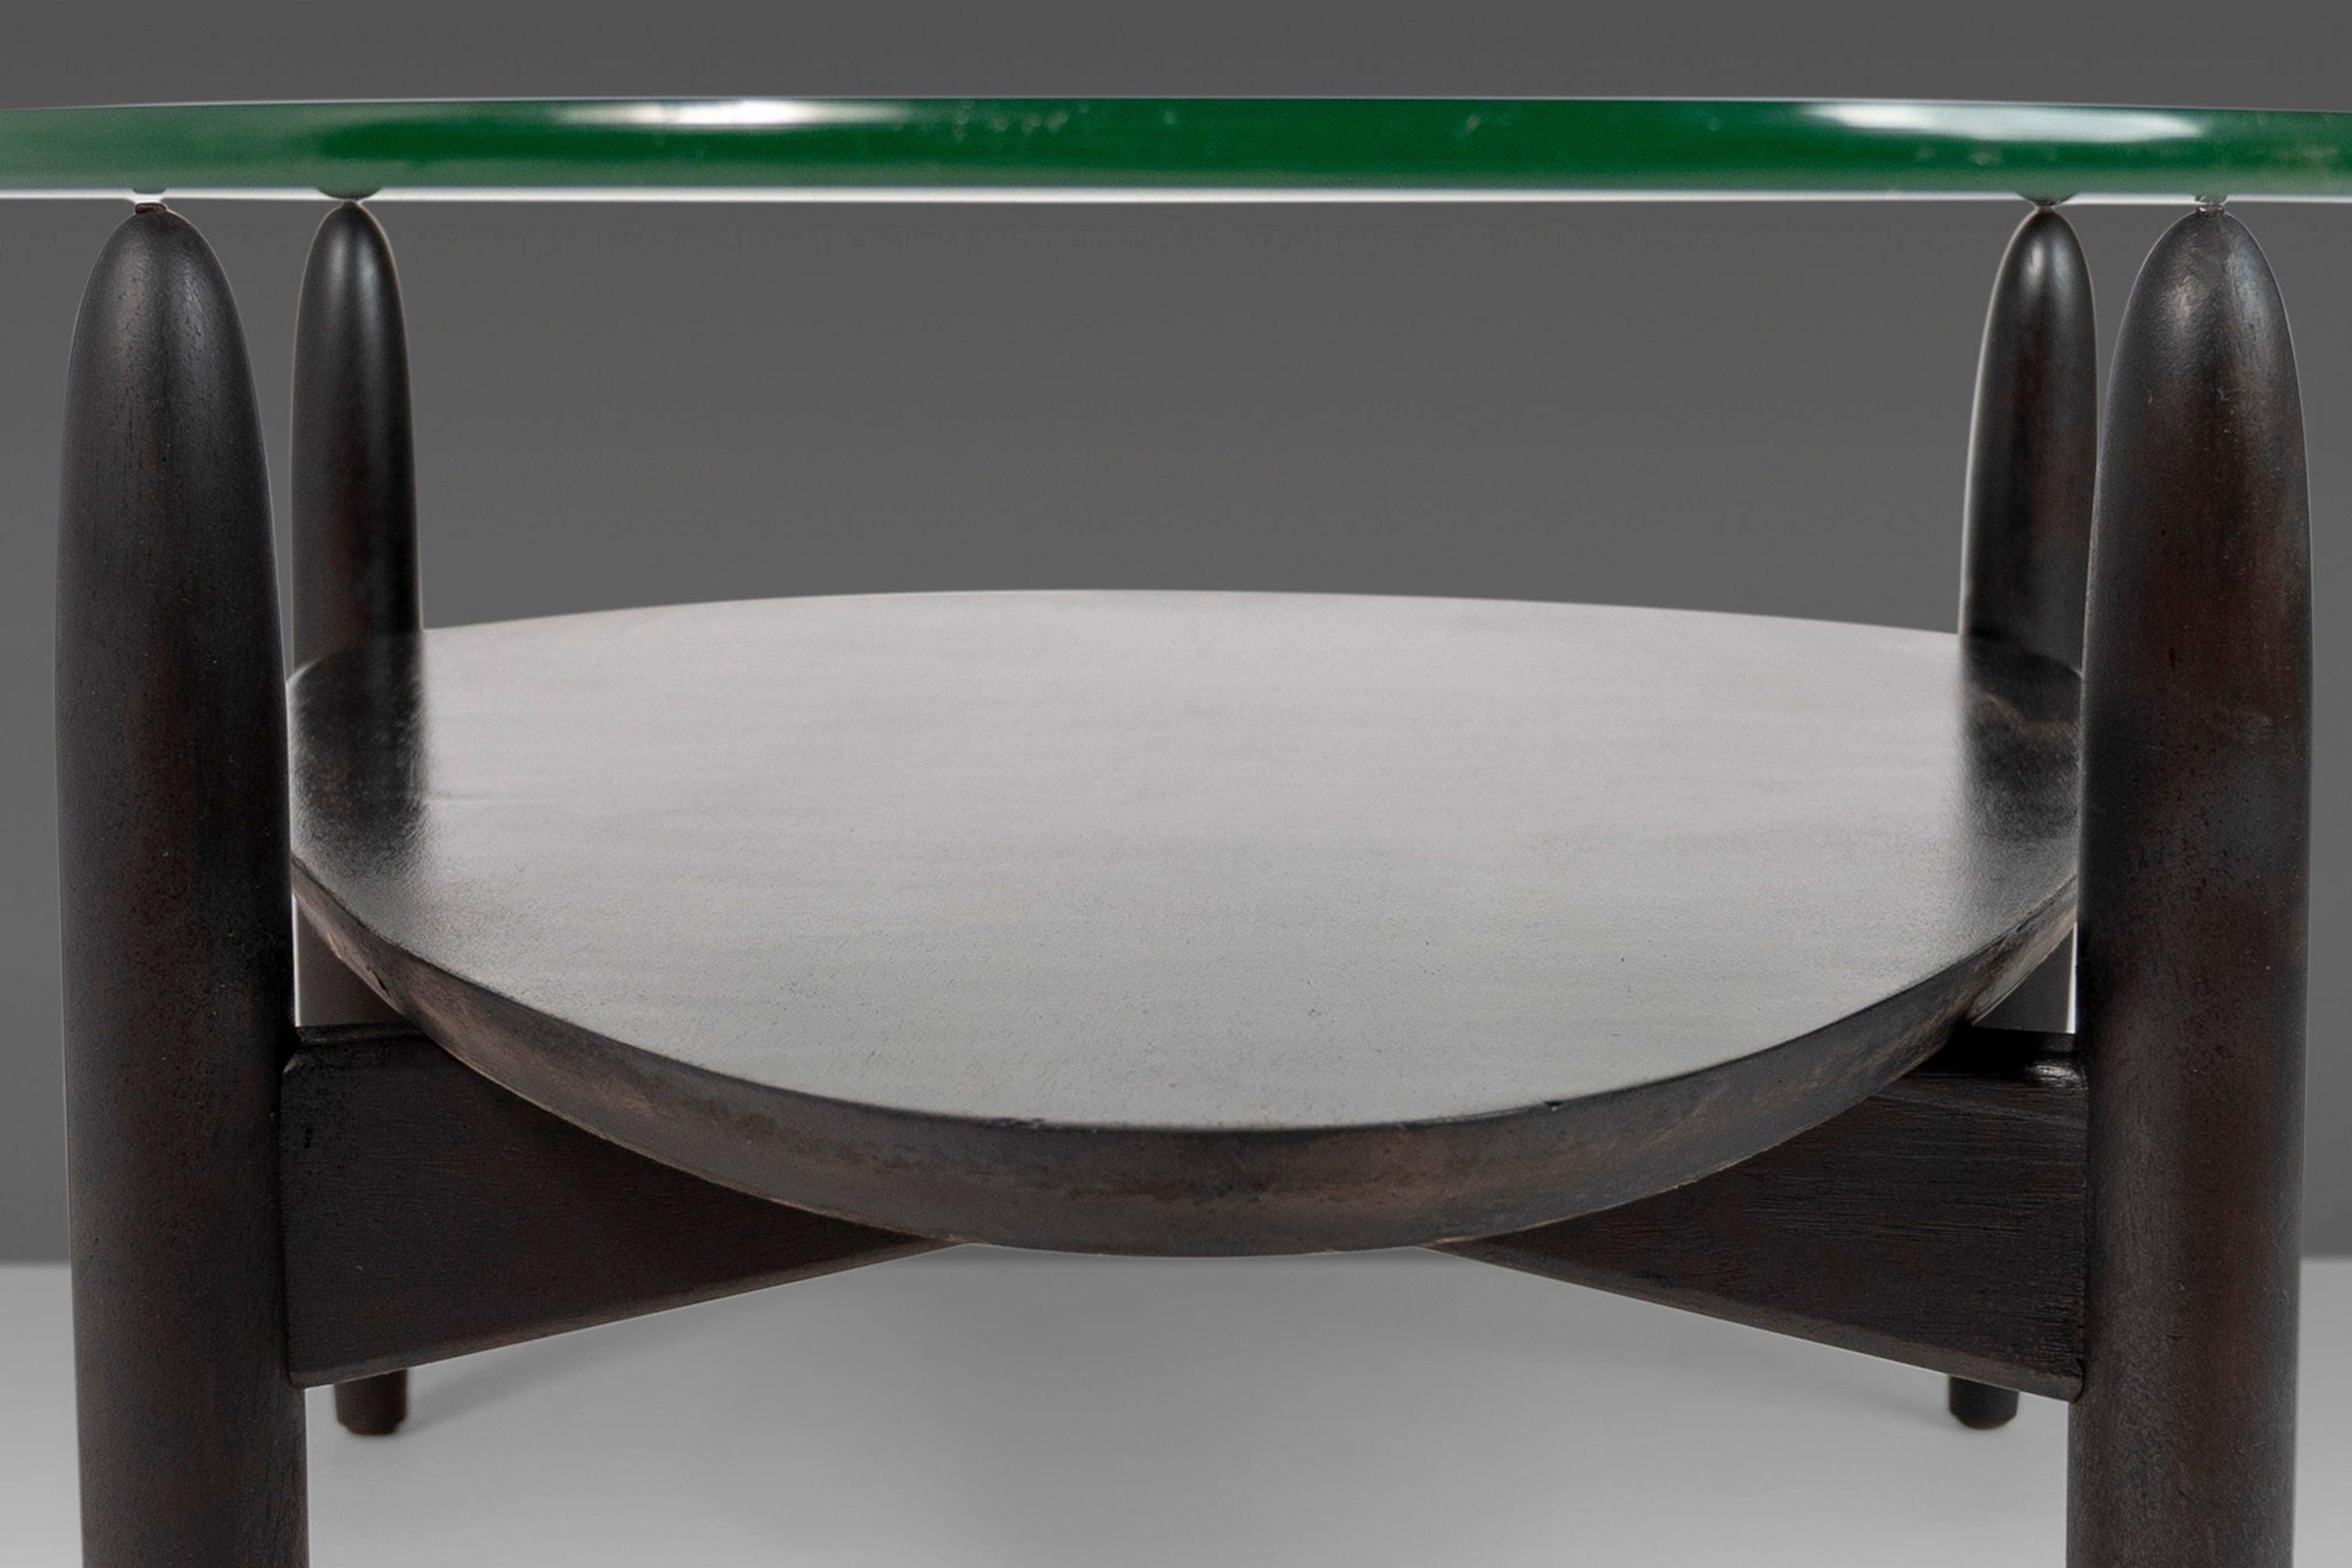 Mid-20th Century Sculptural Coffee Table / Planter Table in Ebonized Walnut by Adrian Pearsall For Sale